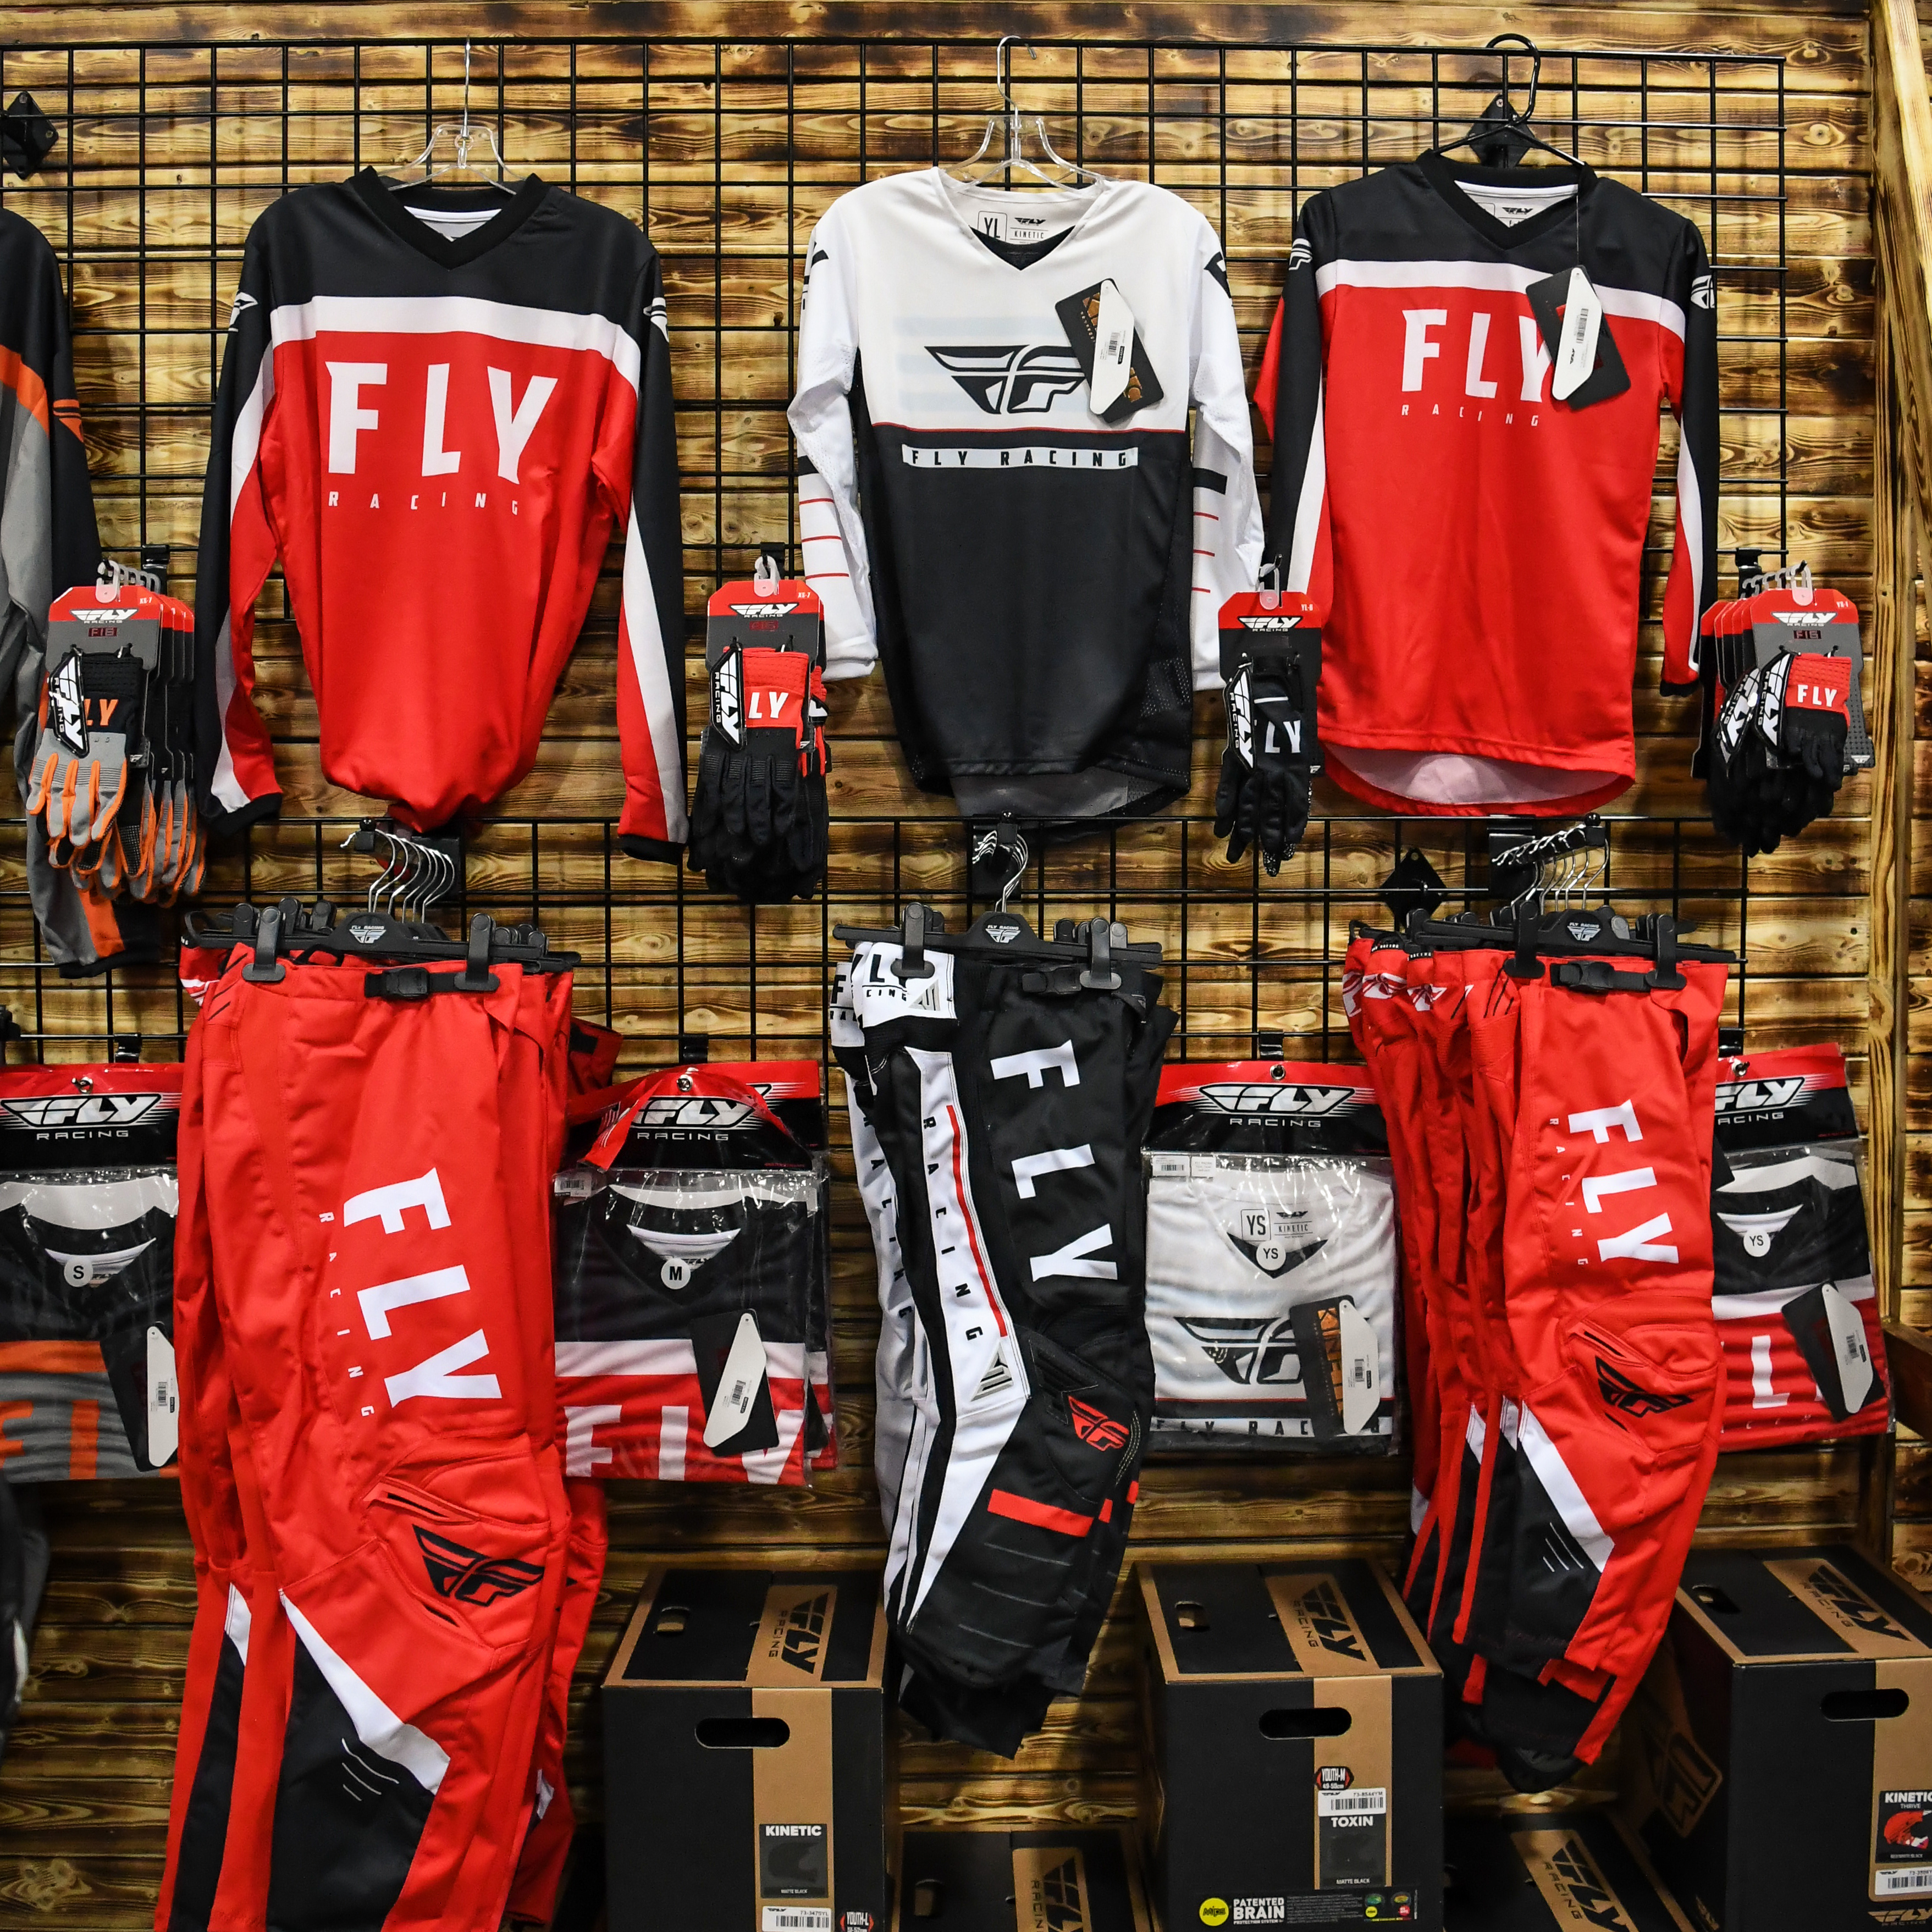 Fly Racing and Fox Racing Dirt bike gear and apparel at motor bike works MBW in Frisco, Texas